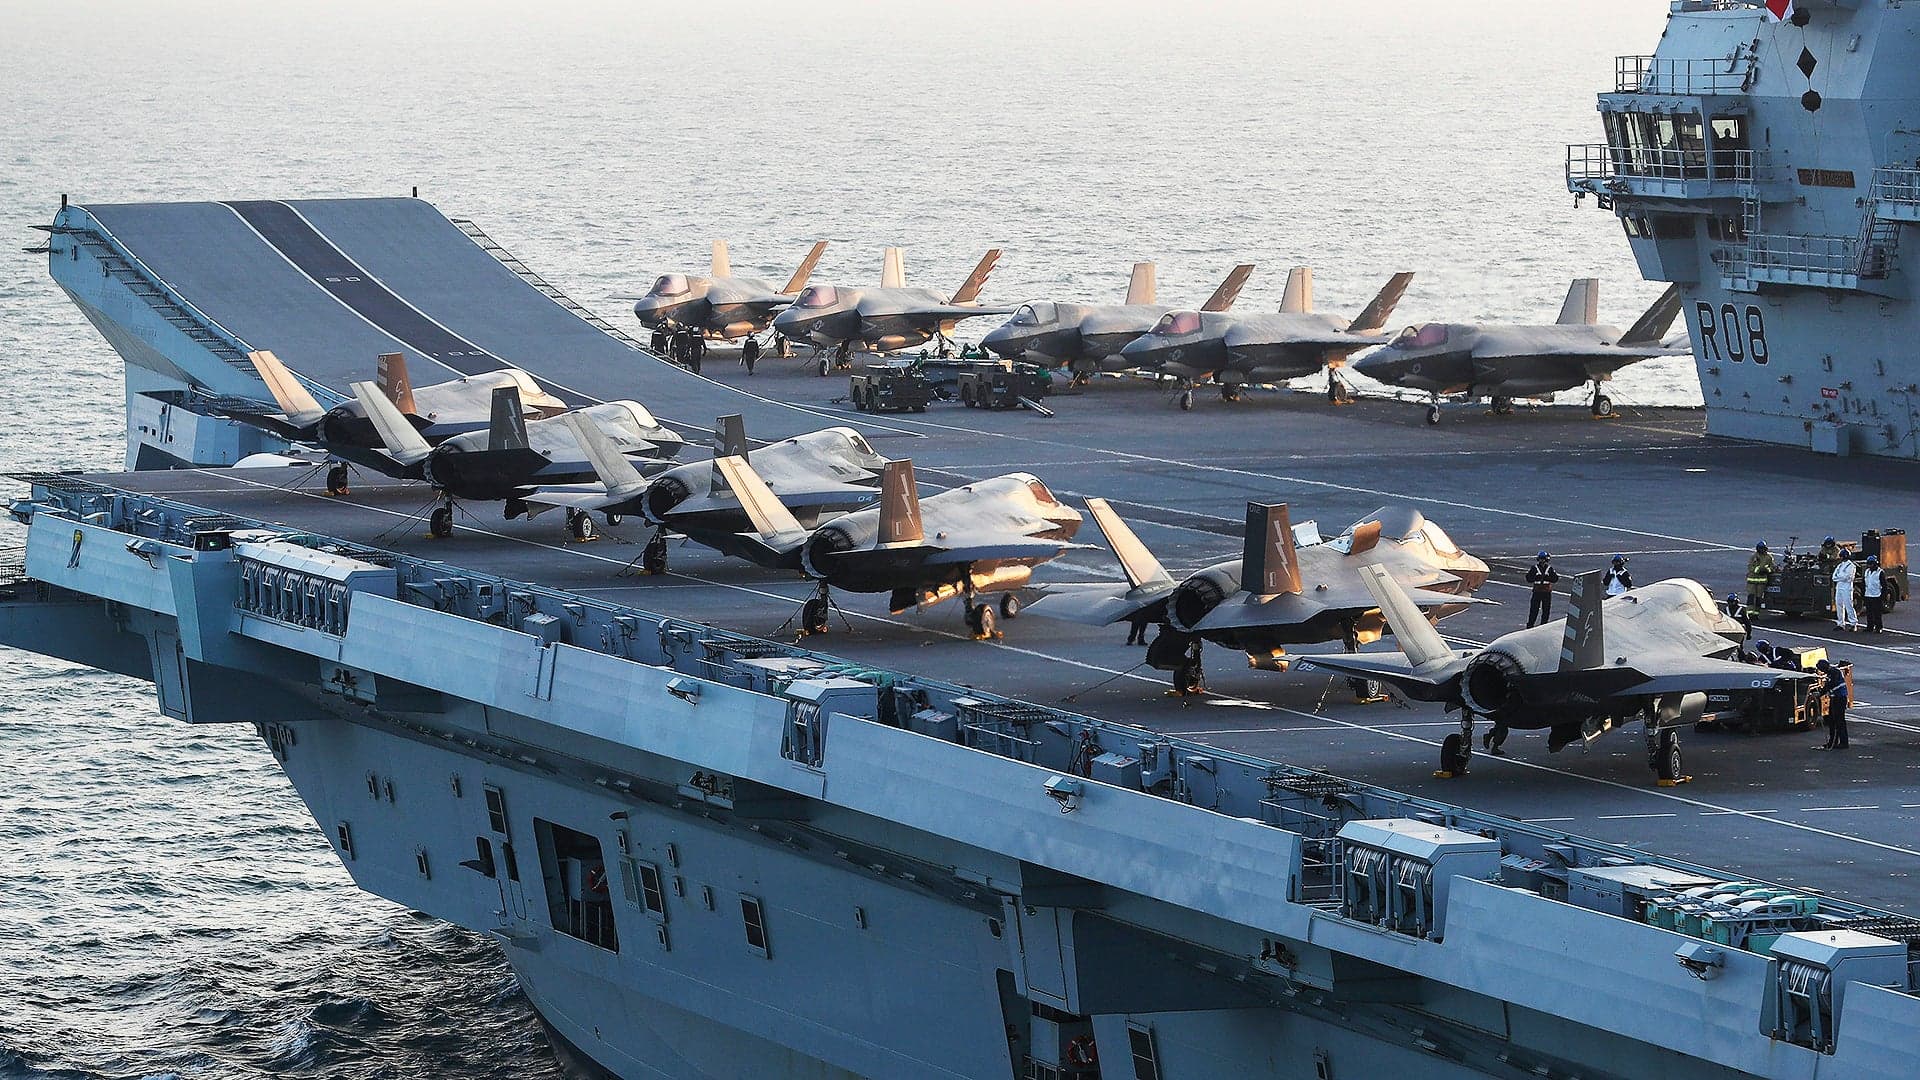 Behold A British Carrier Carrying The Most Stealth Fighters Of Any Warship To Date